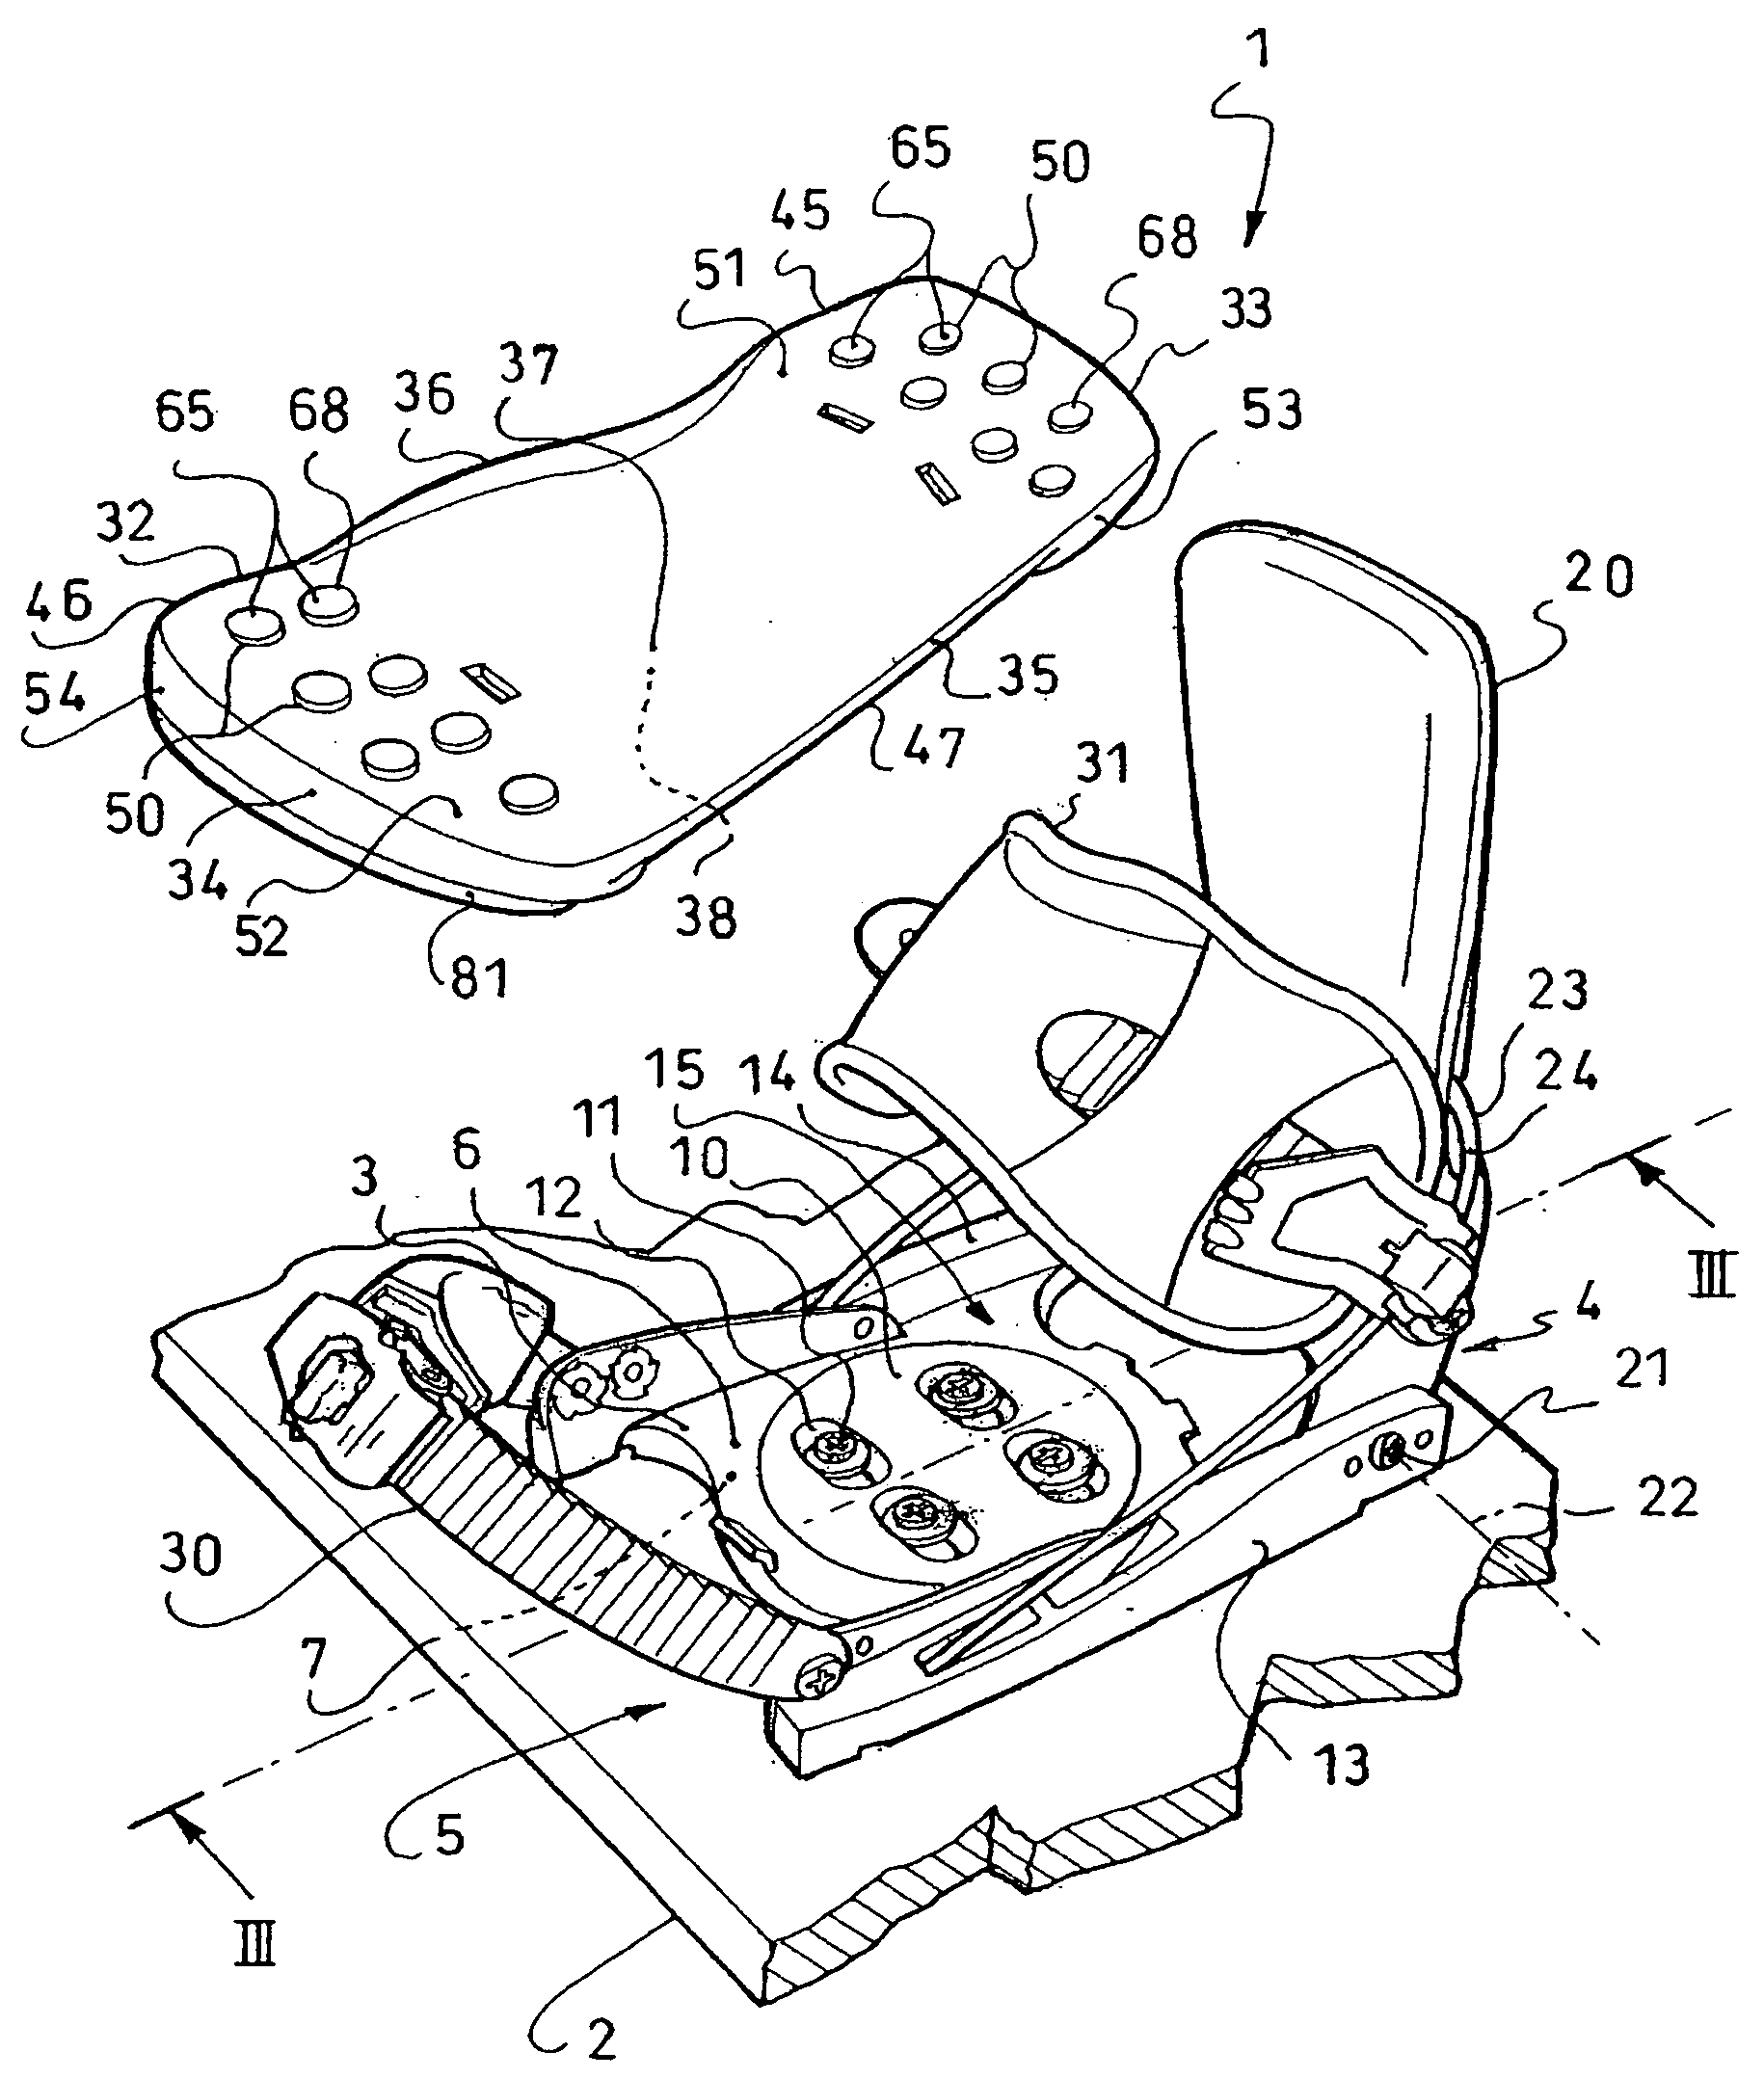 Device for receiving a foot or a boot on a sports apparatus